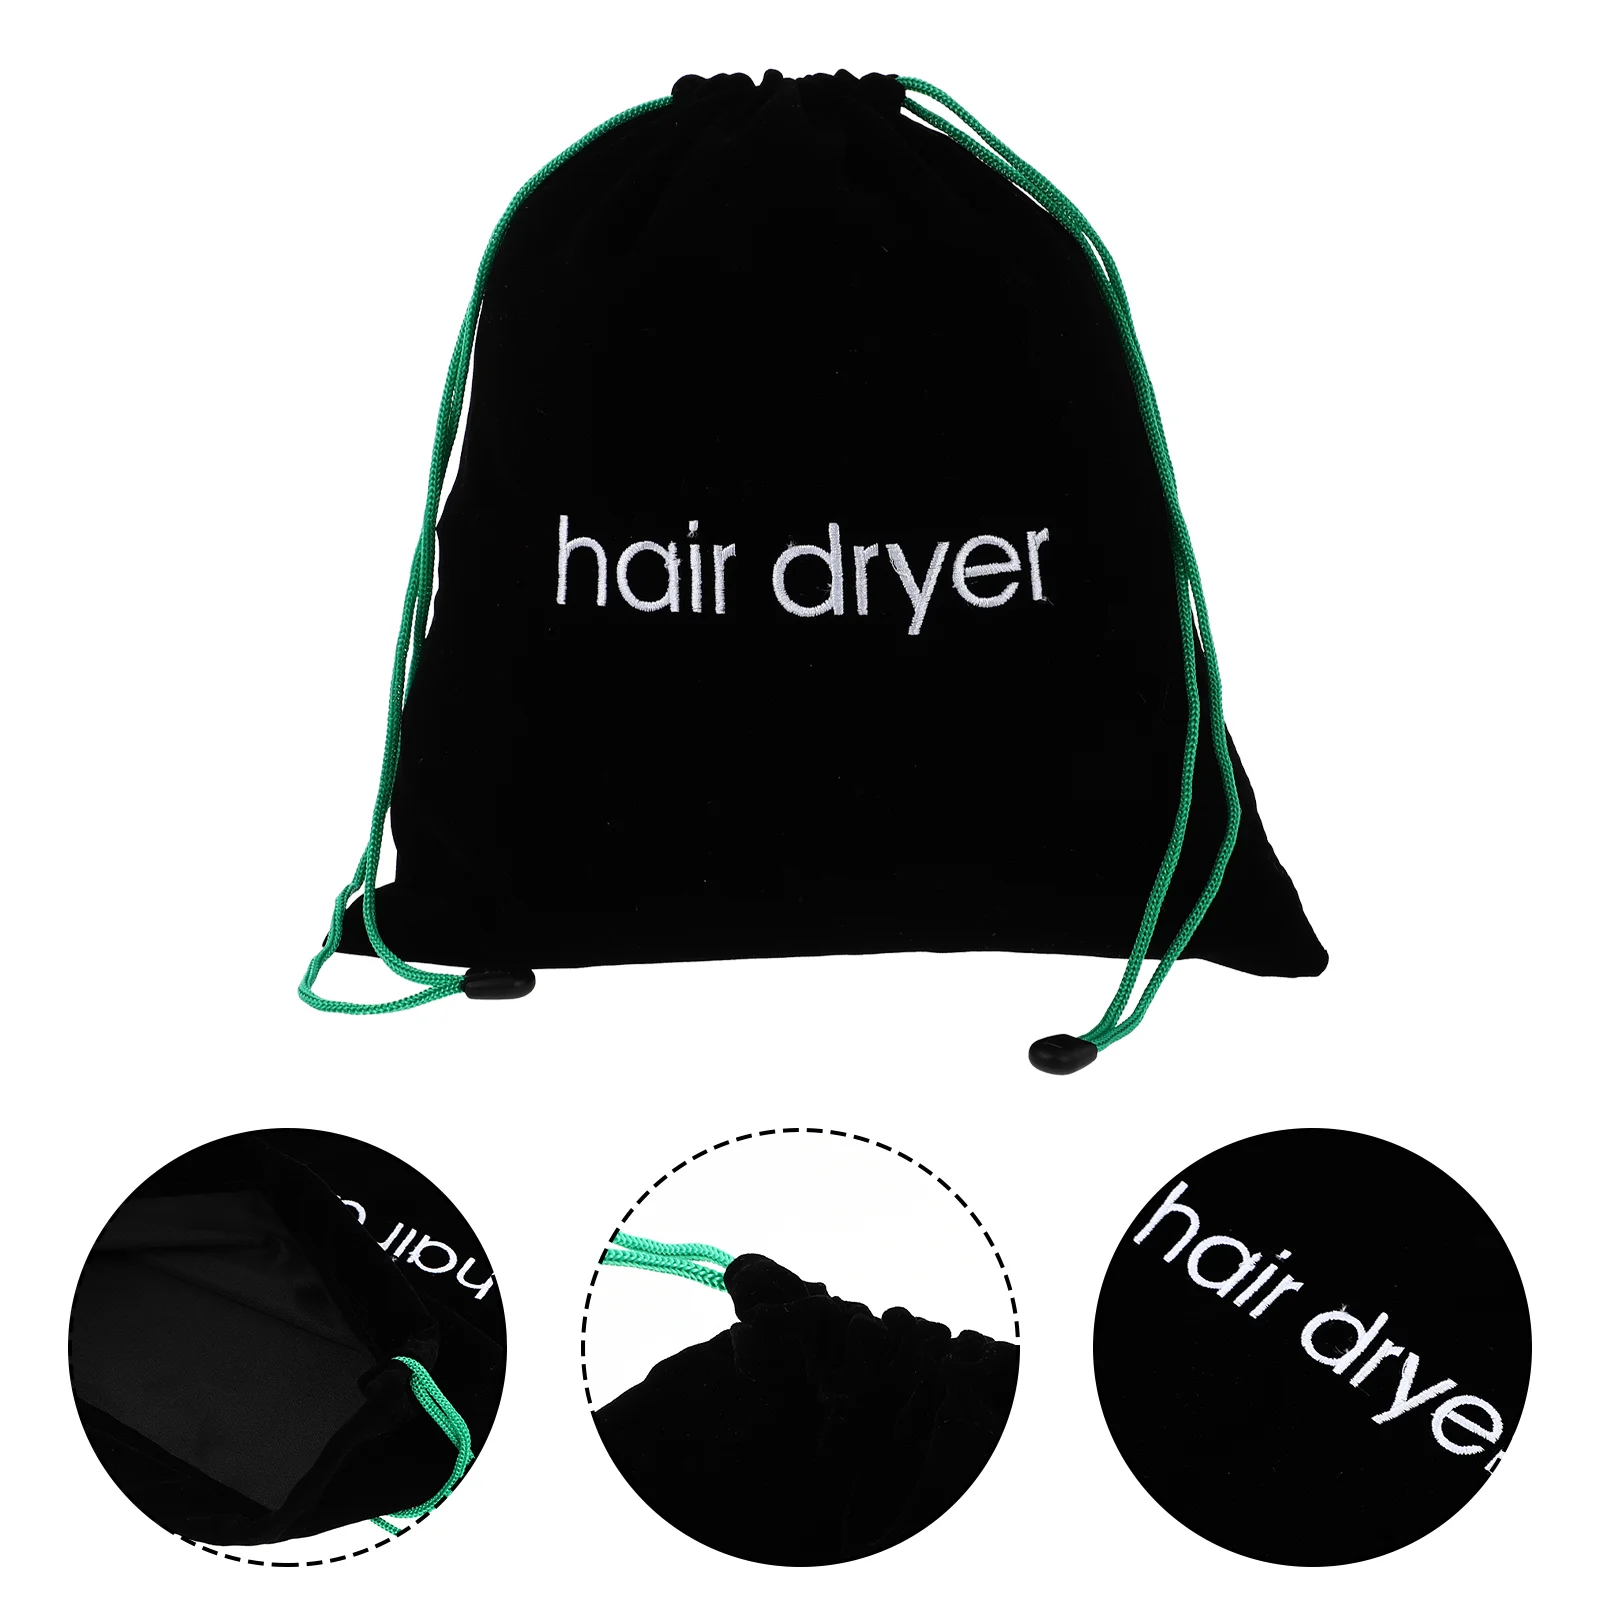 

Dryer Bag Hair Drawstring Storage Container Hairdryer Pouch Travel Organizer Blow Styling Tools Blower Bathroom Carry Holder